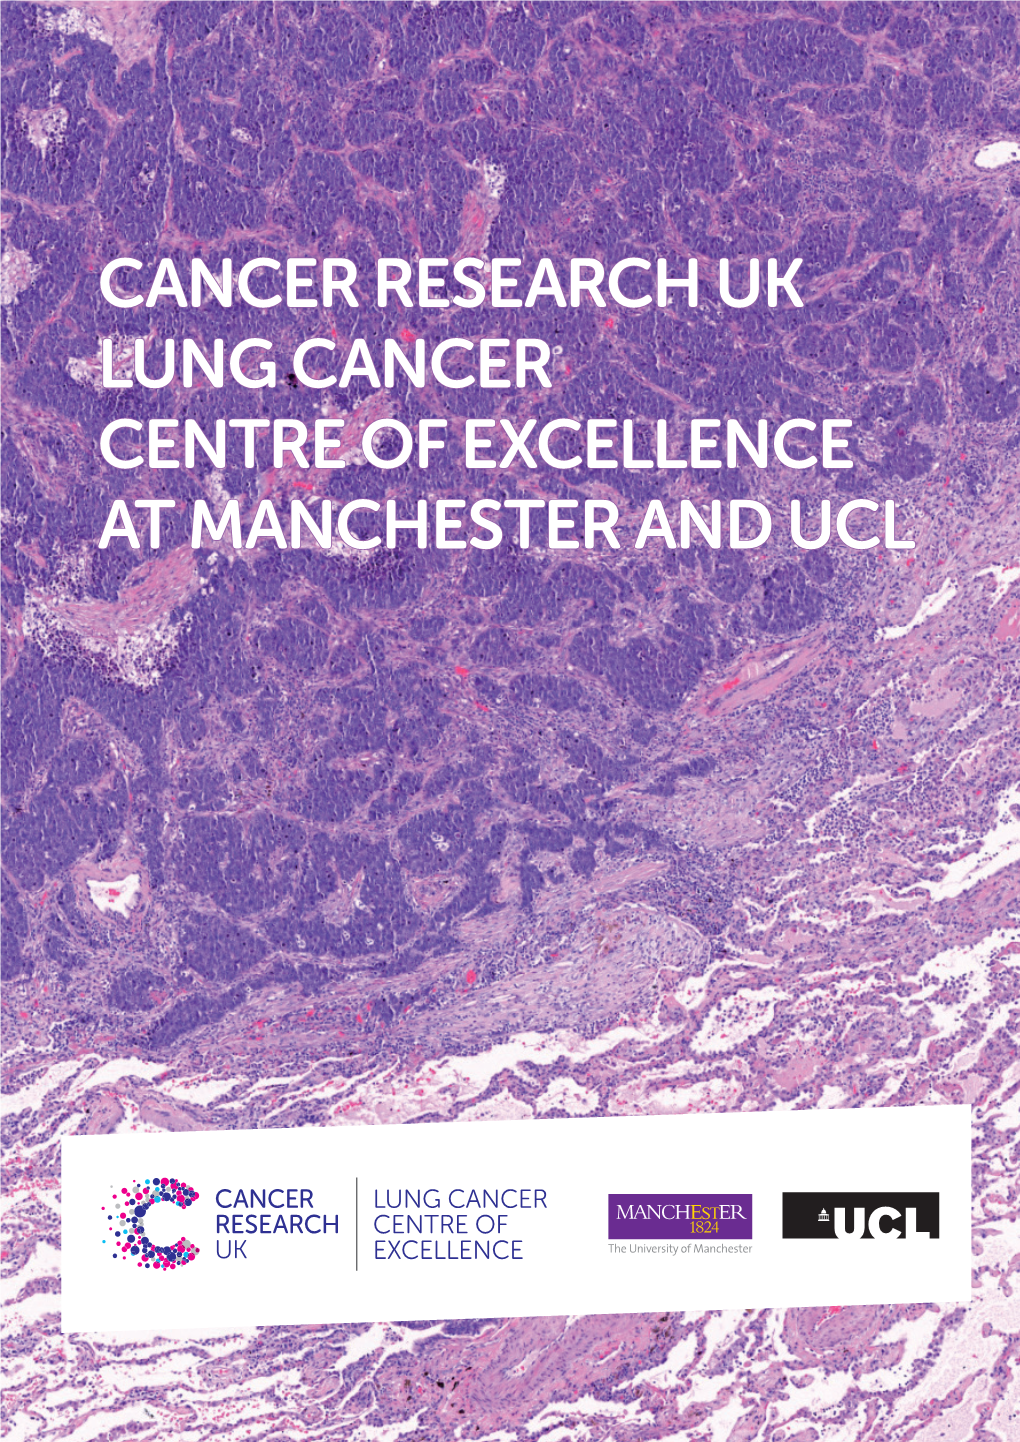 Cancer Research Uk Lung Cancer Centre of Excellence at Manchester and Ucl